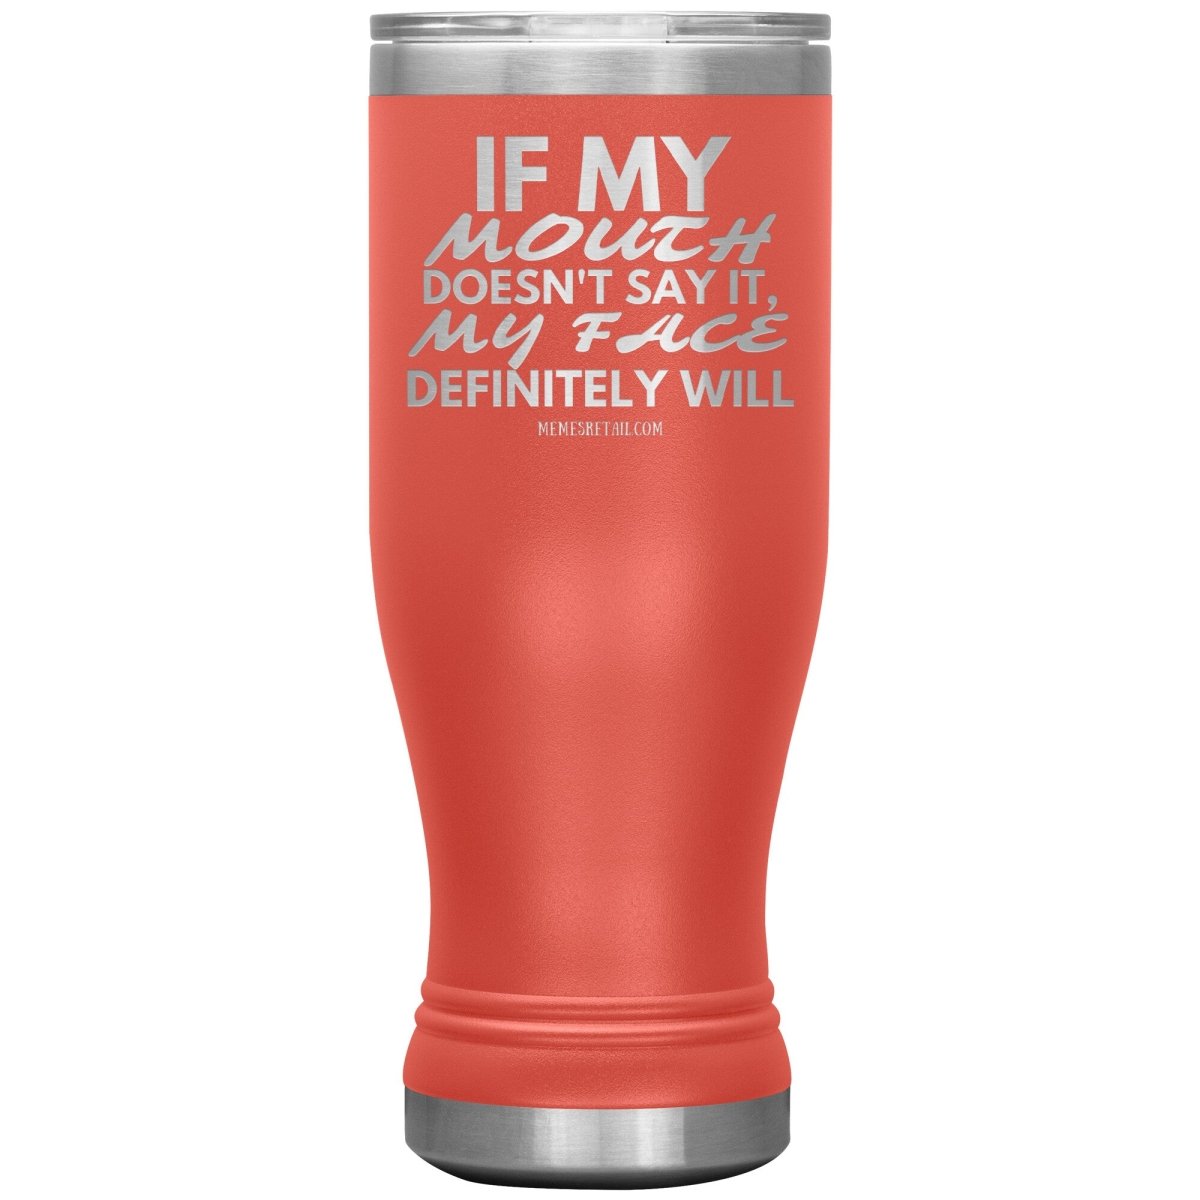 If my mouth doesn't say it, my face definitely will Tumblers, 20oz BOHO Insulated Tumbler / Coral - MemesRetail.com